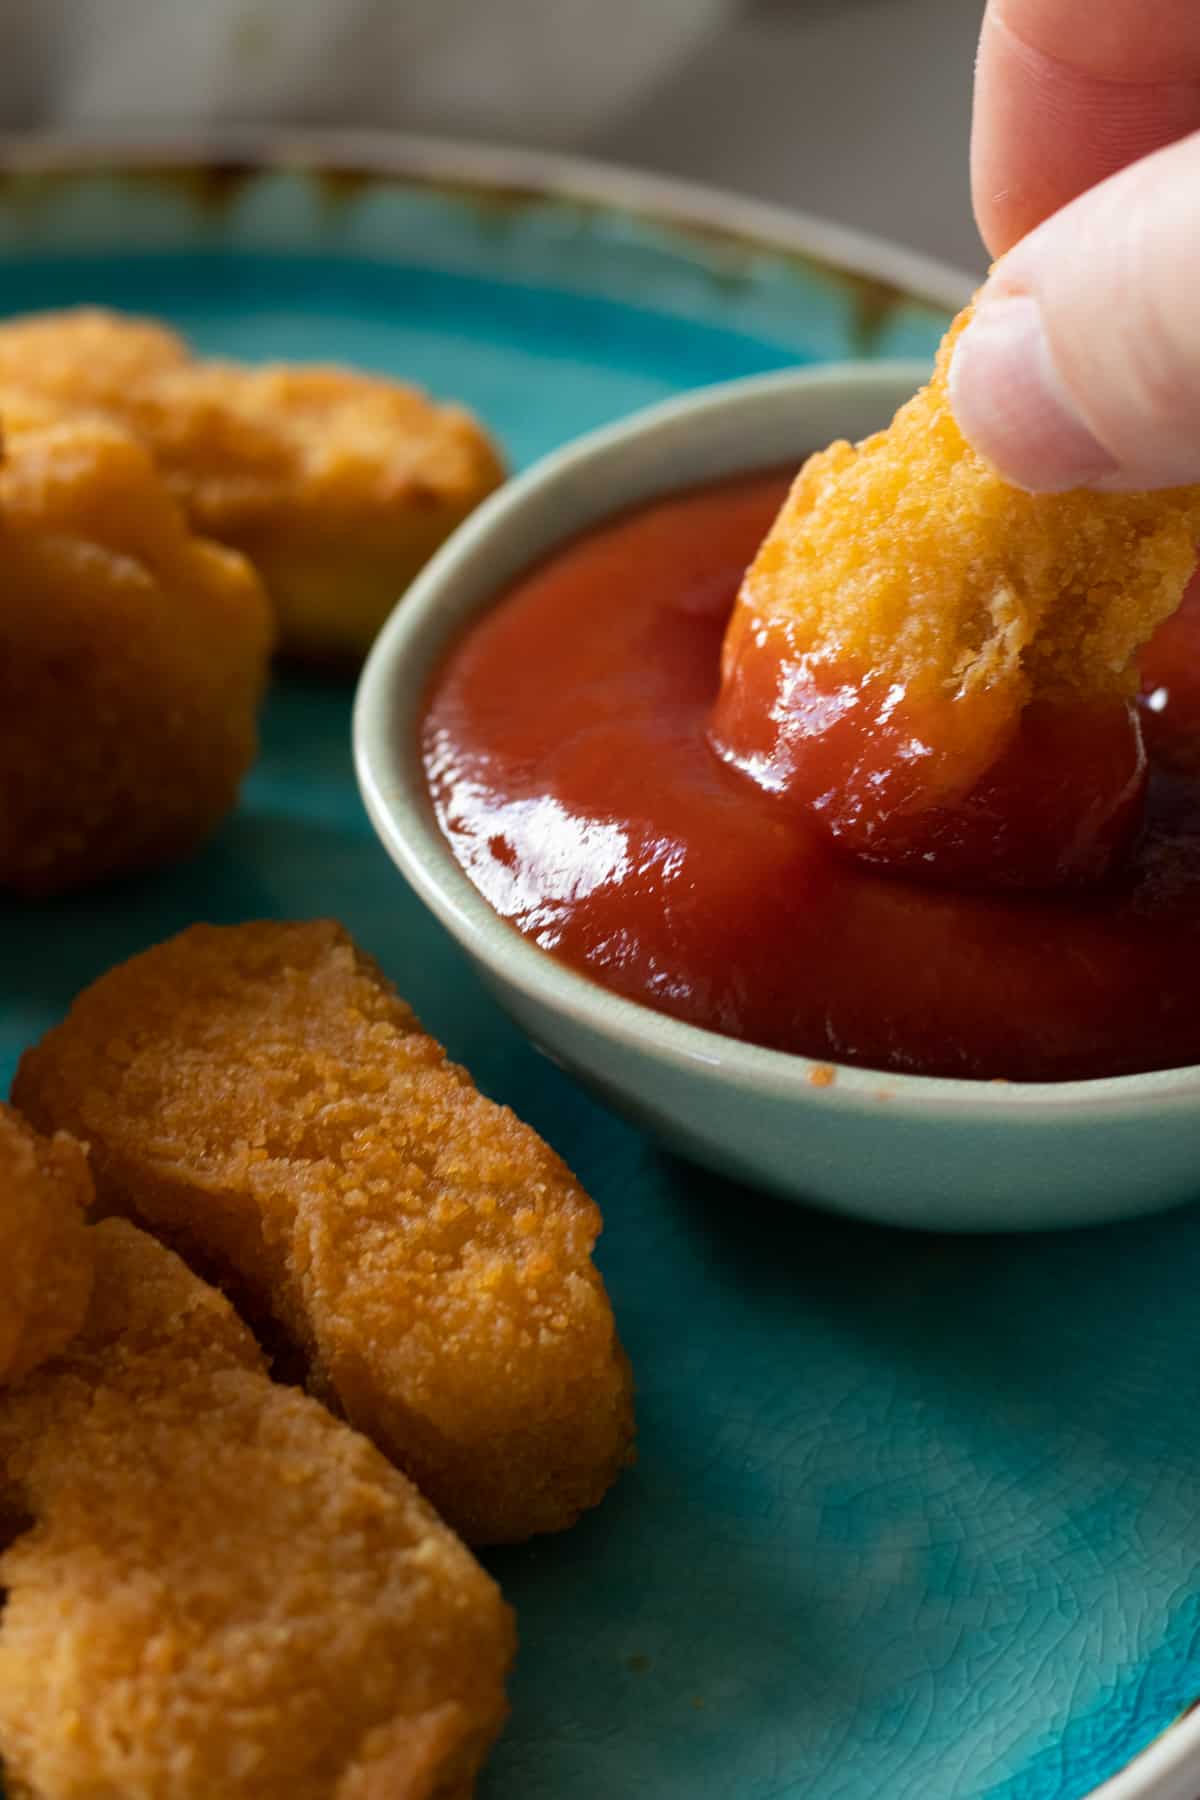 a chicken nugget being dipped in ketchup.